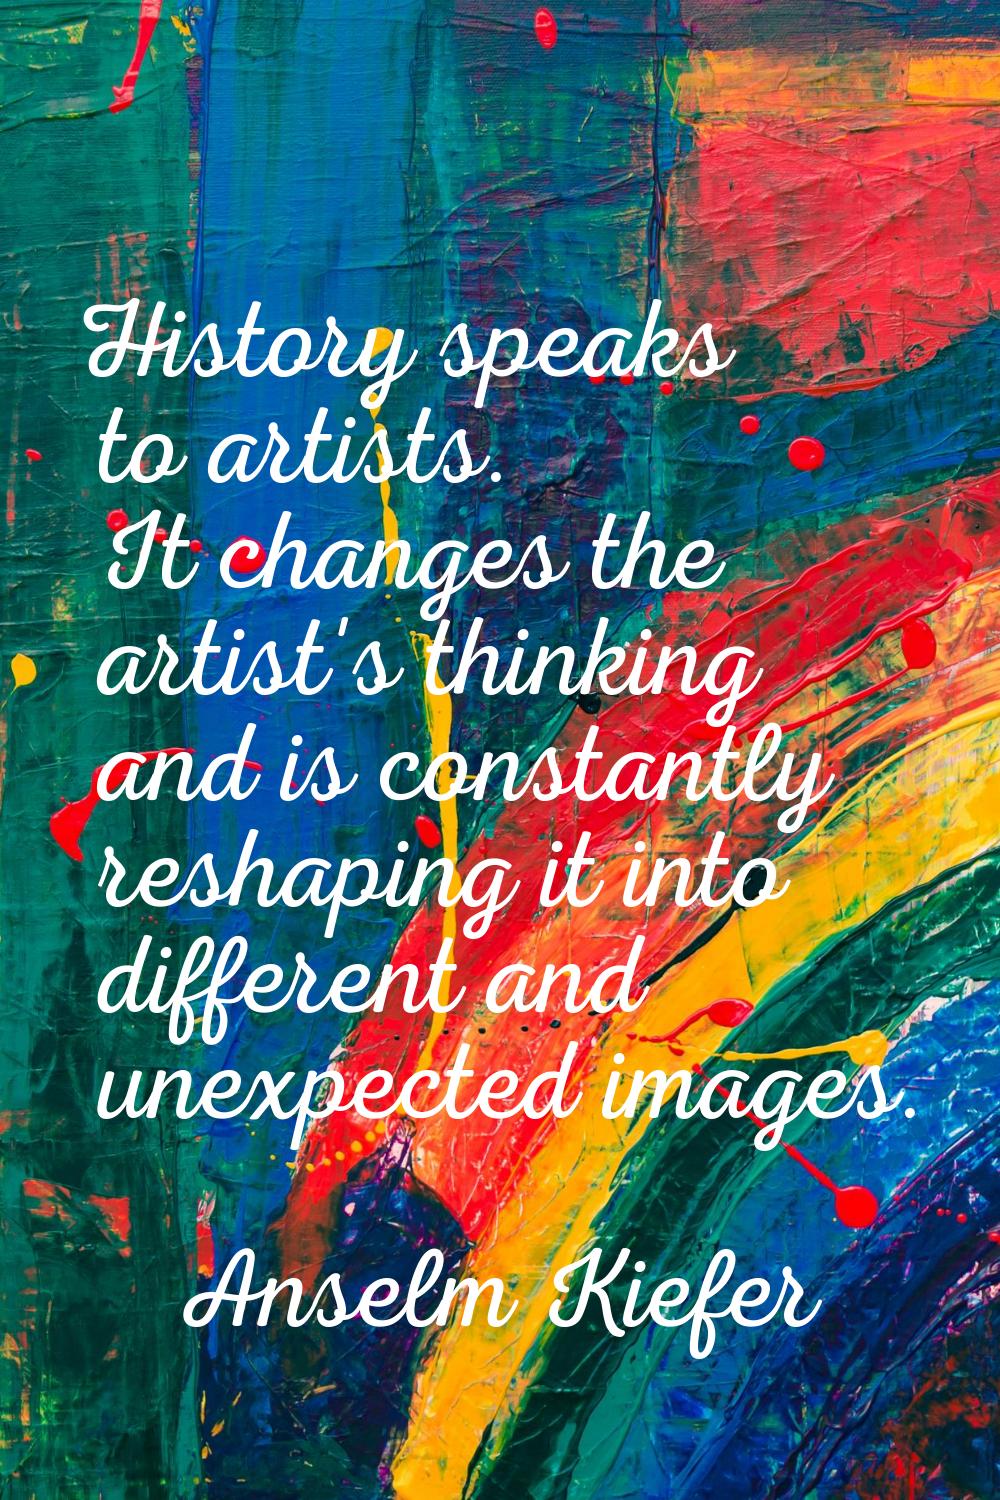 History speaks to artists. It changes the artist's thinking and is constantly reshaping it into dif